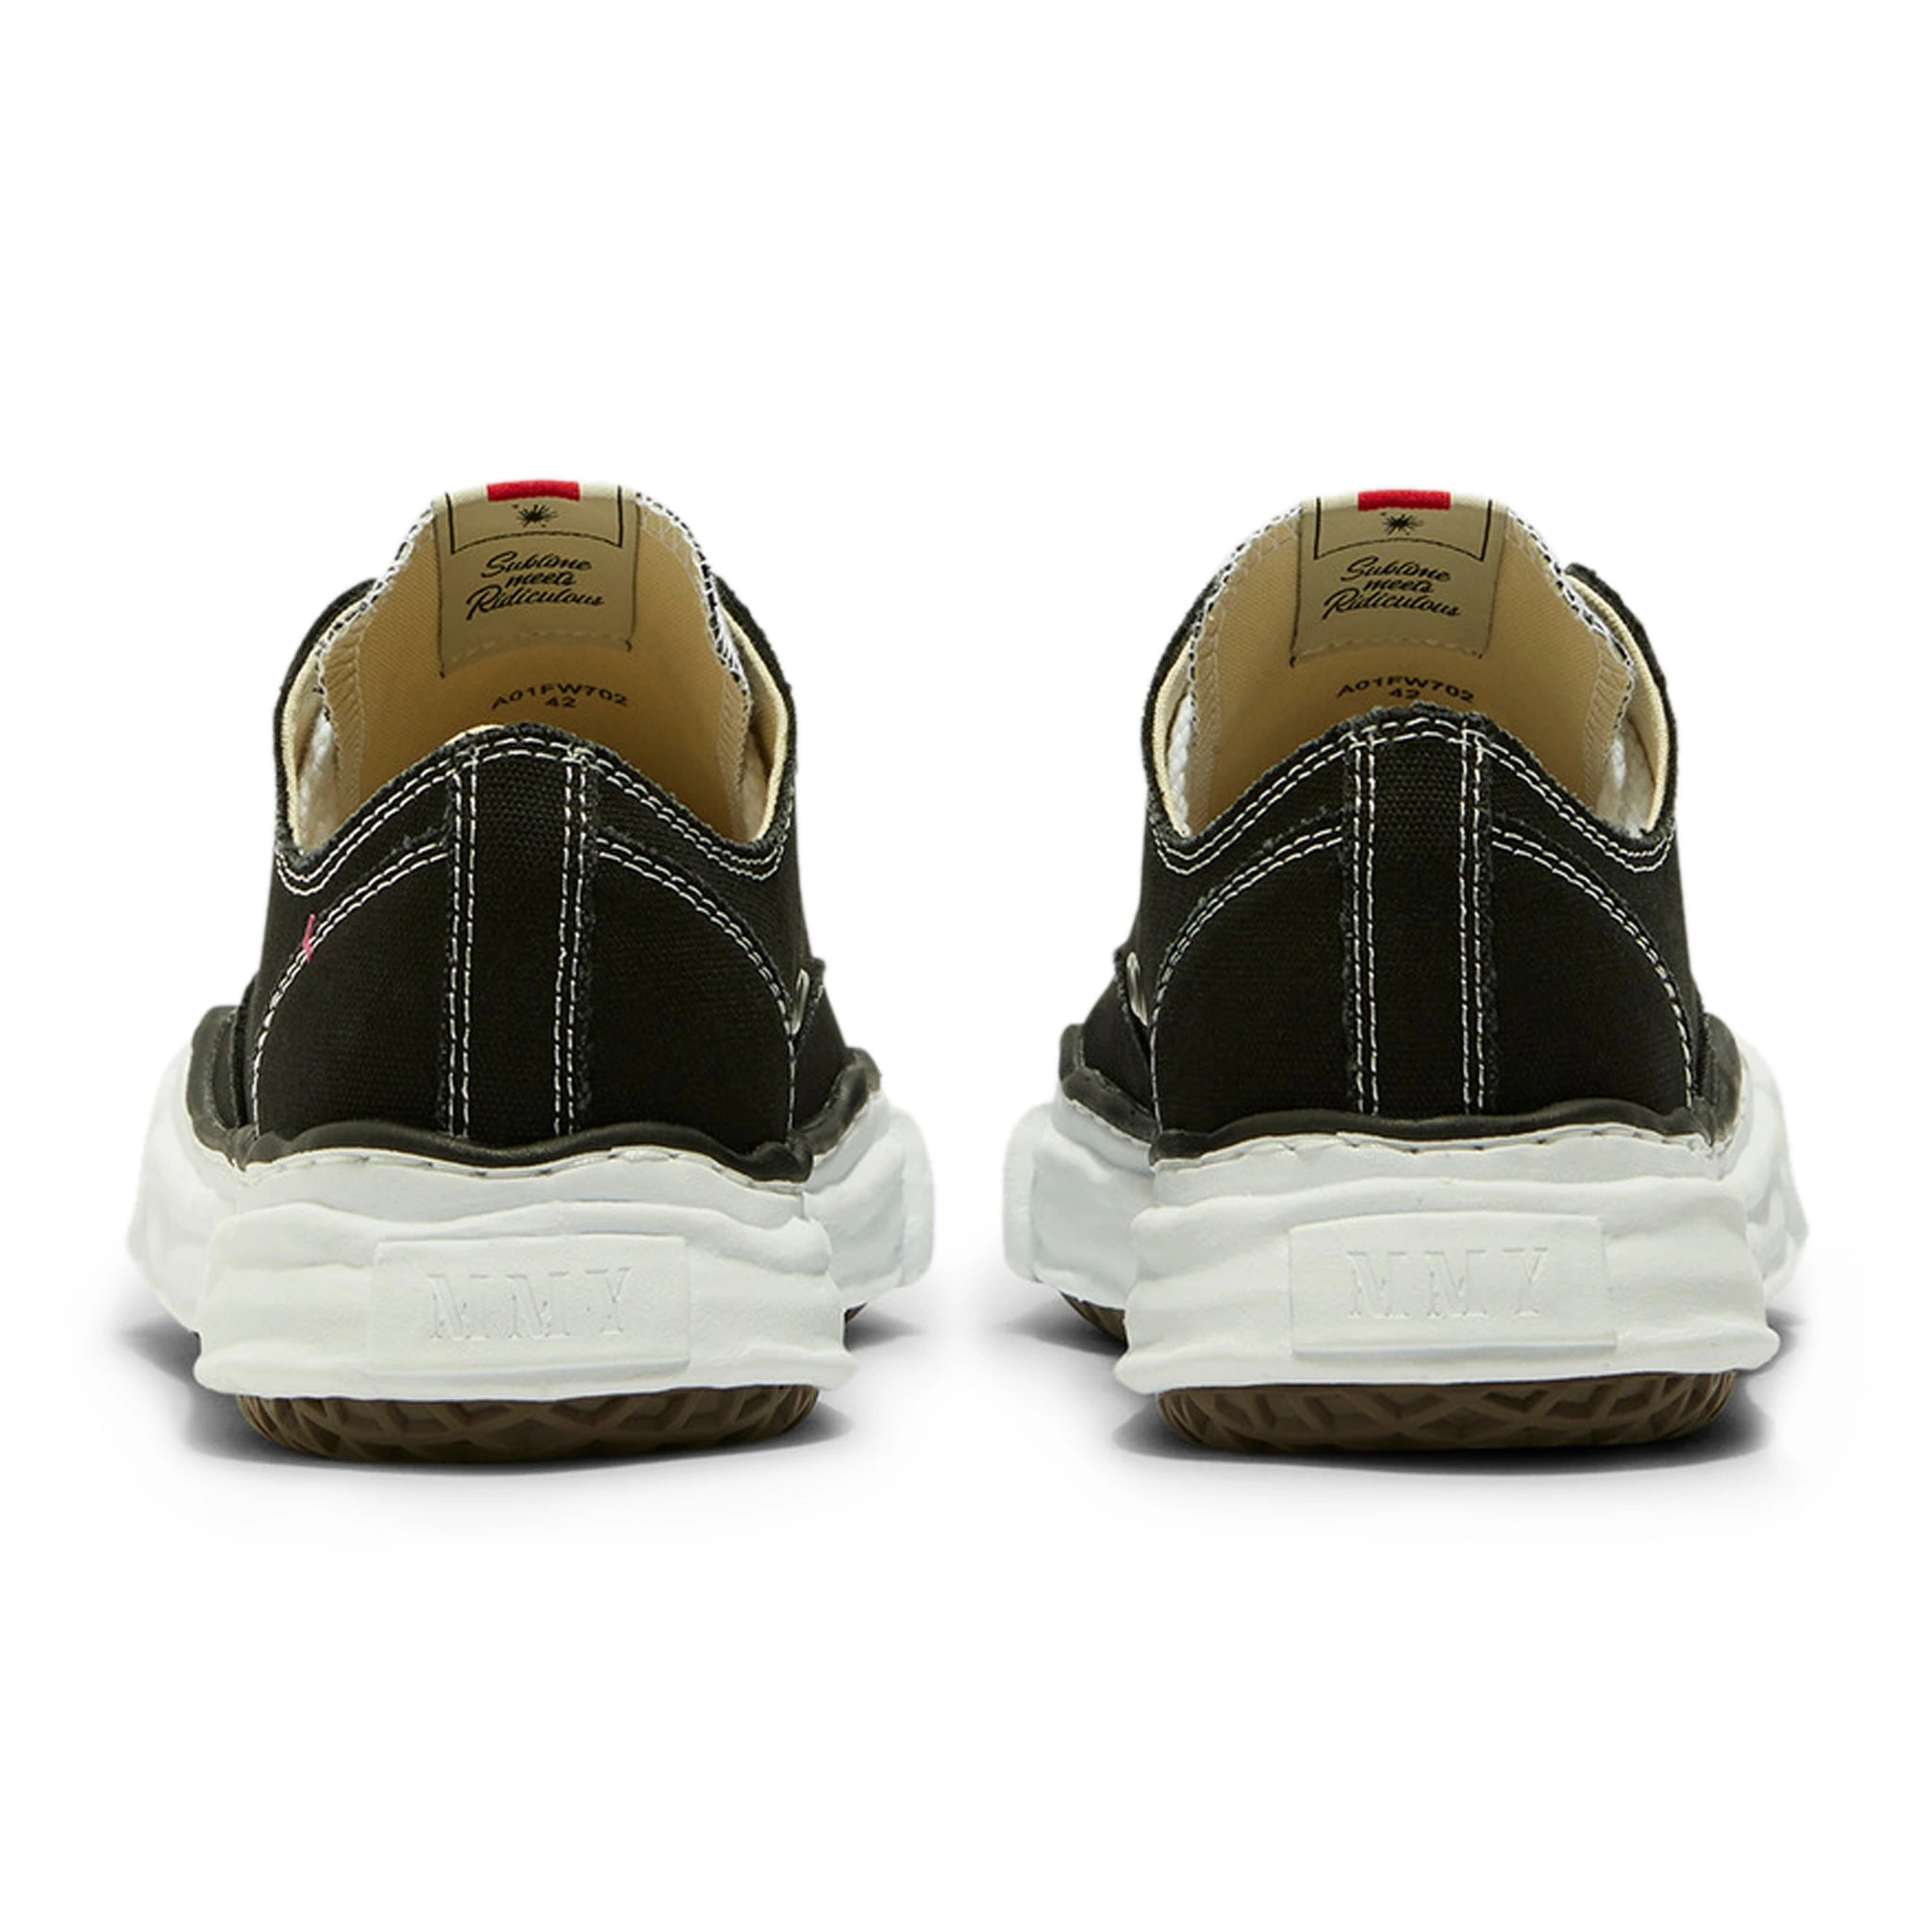 Back view of Maison Mihara Yasuhiro Peterson Original Sole Low Canvas Sneaker A01FW702